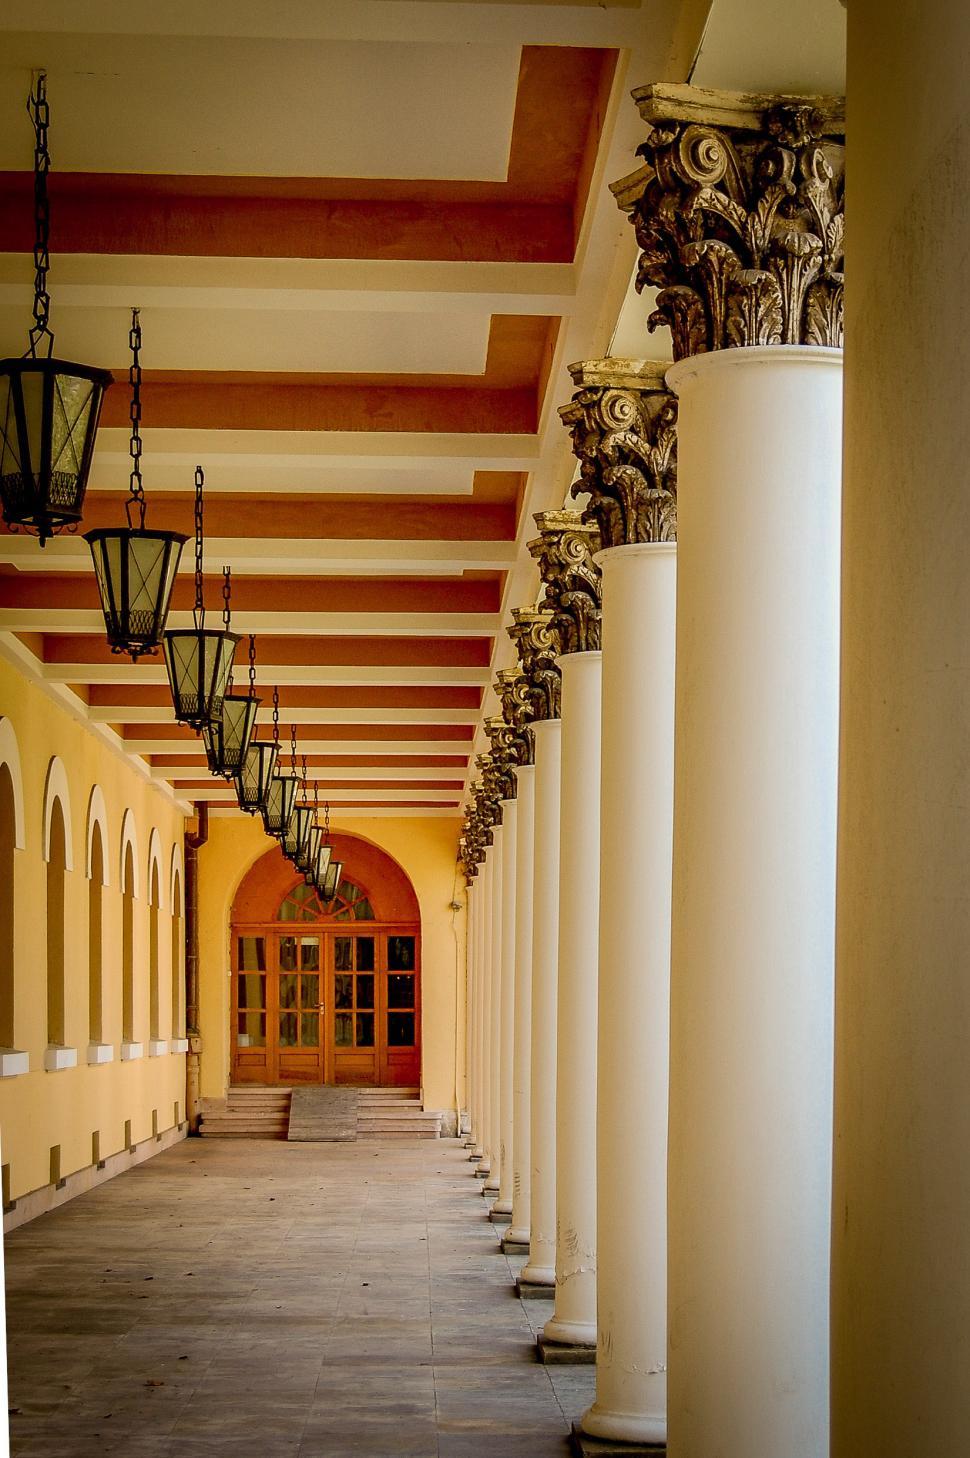 Free Image of Grand Hallway With Columns and Lamps 